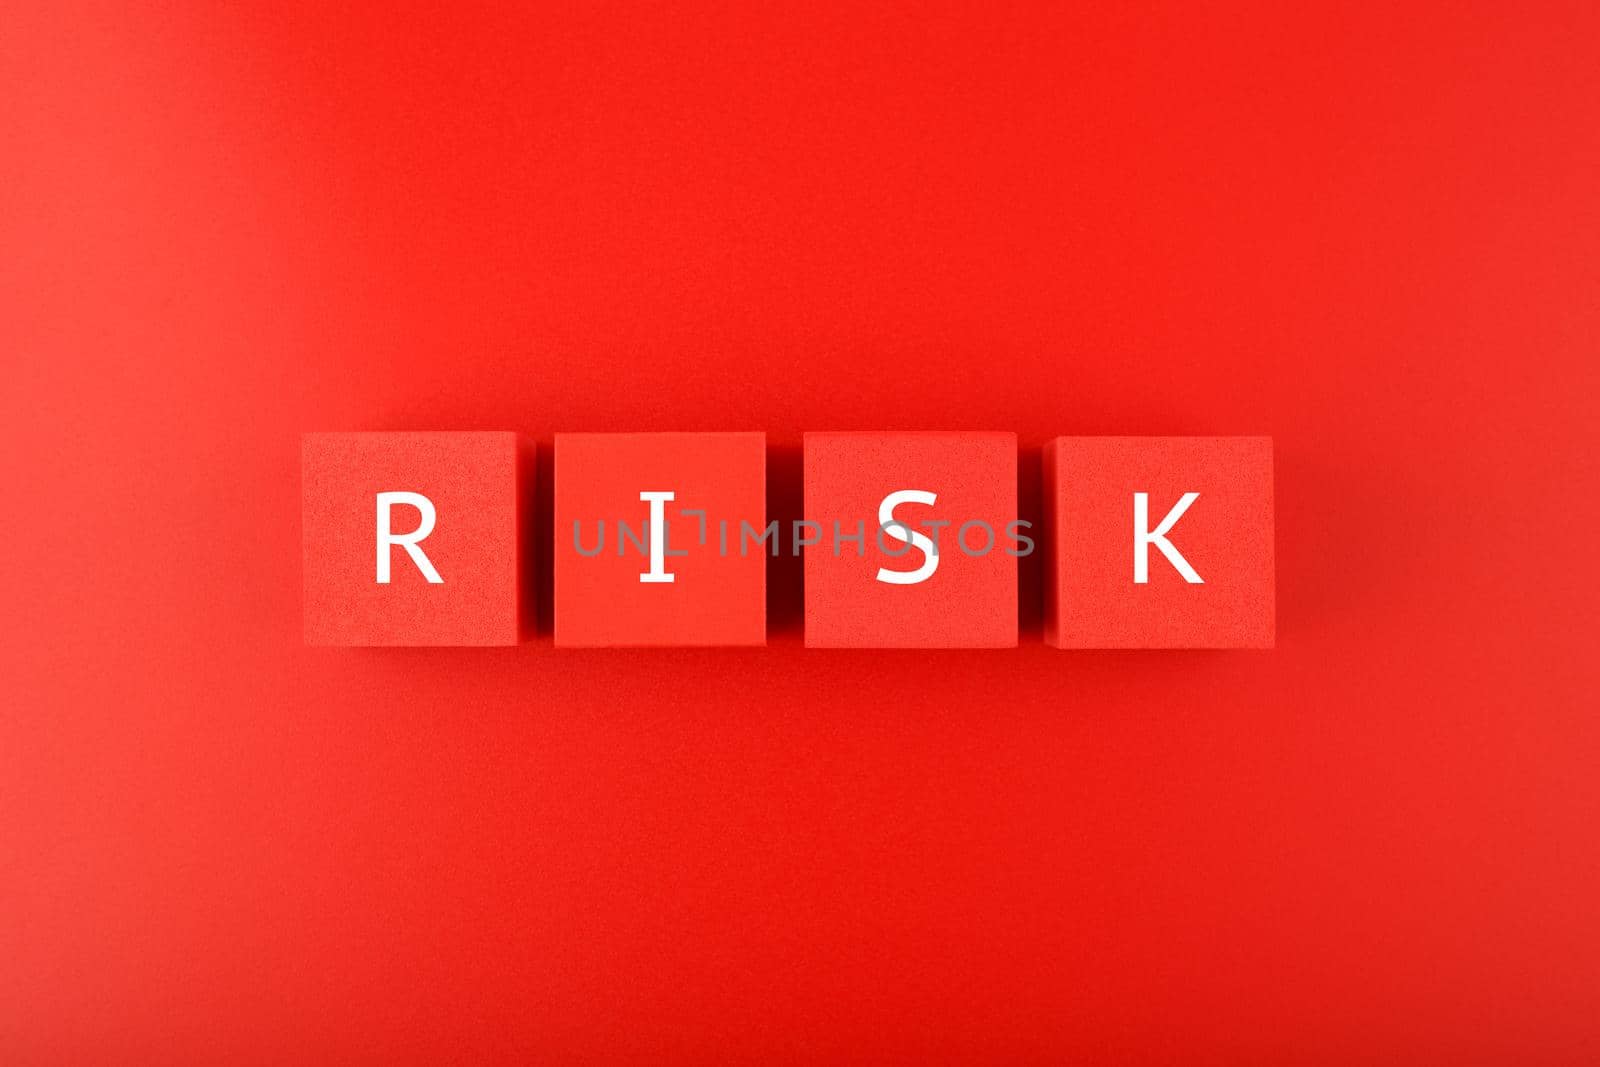 Risk single word written on red cubes against red background. Concept of risk and danger in business, social life, health, life style decisions or strategy